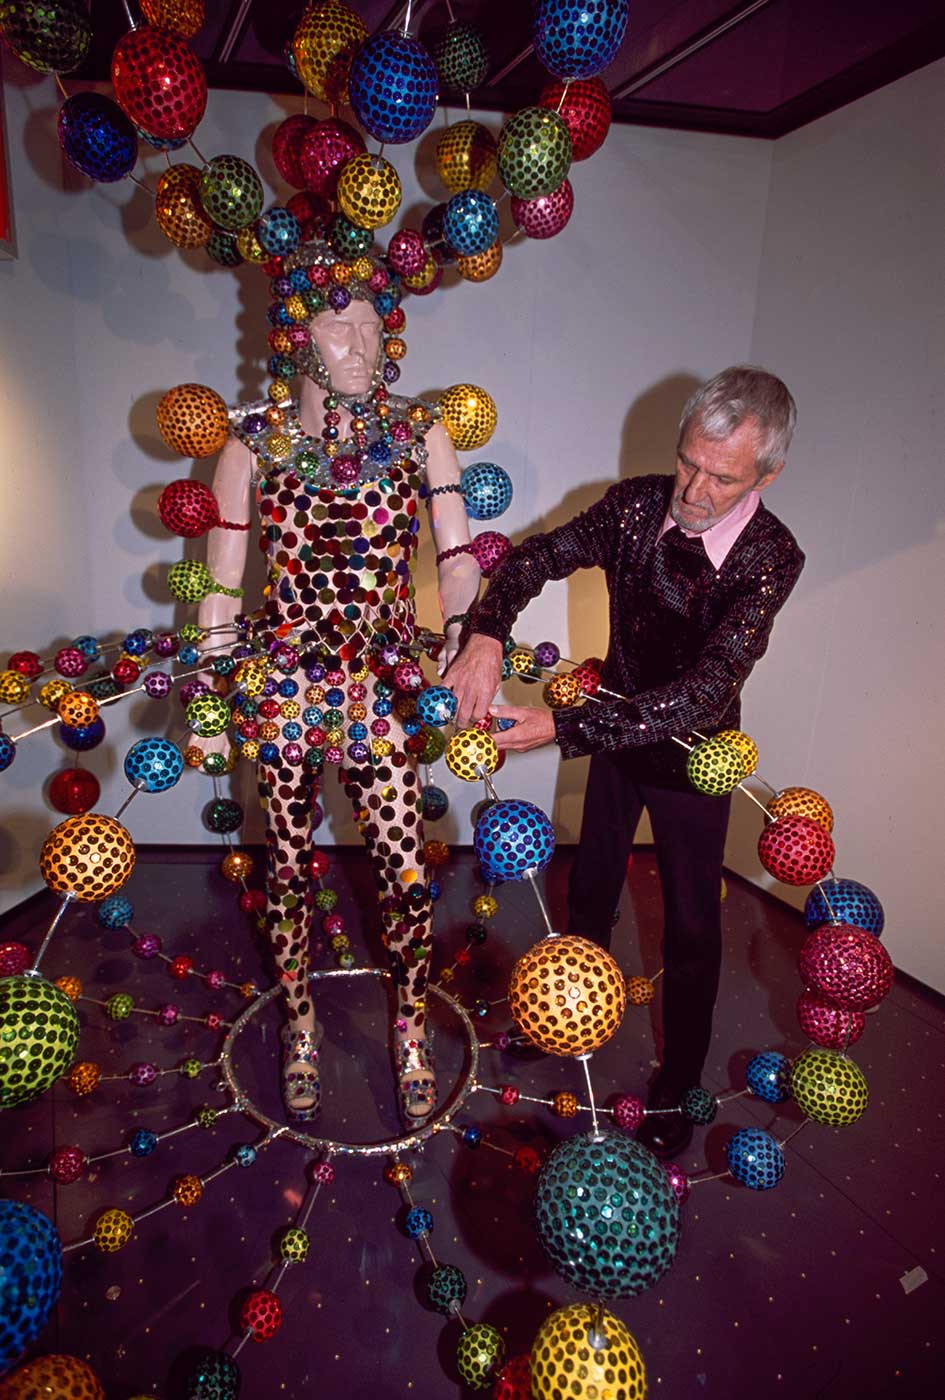 Man in sequined top adjusting colourful adornments on a costume that is worn by a mannequin - click to view larger image